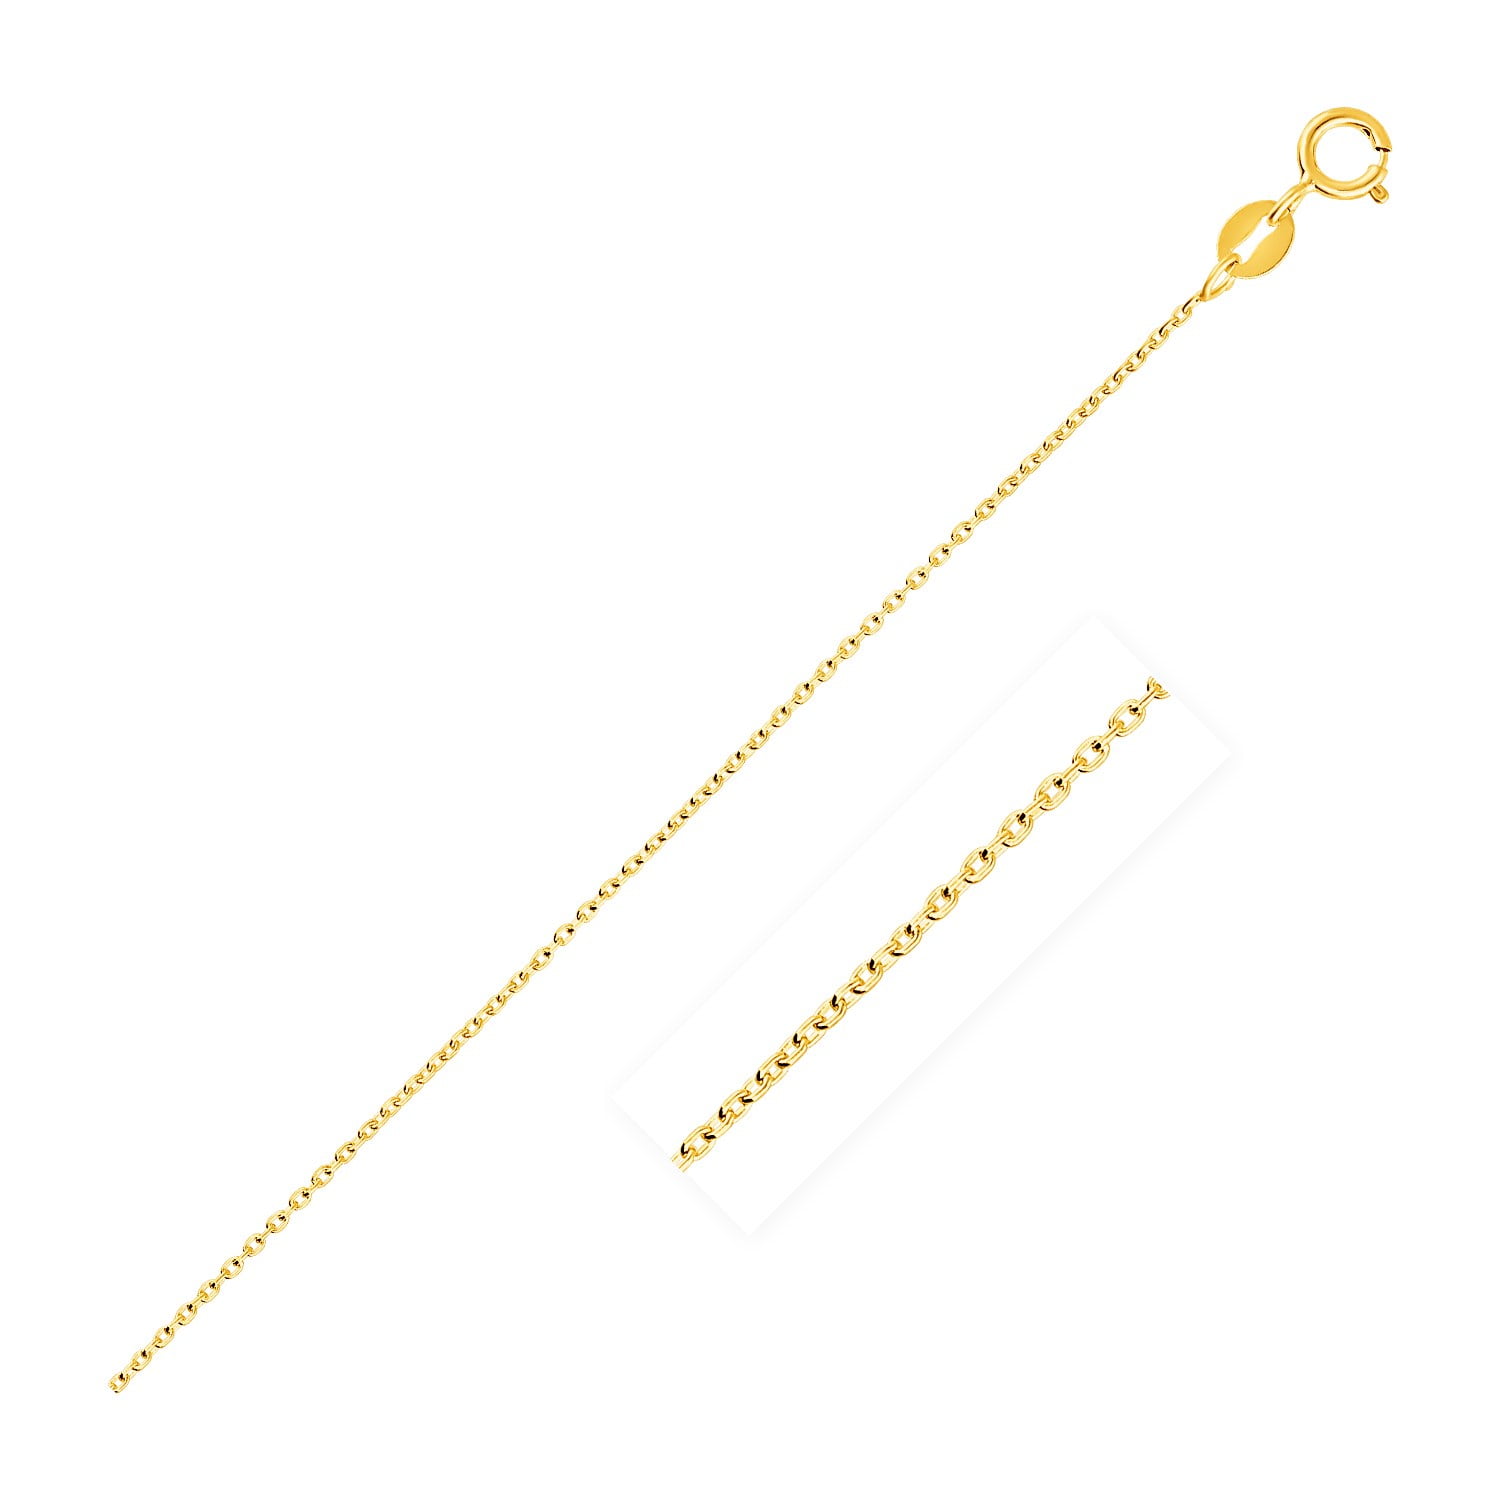 0.6mm 14K Yellow Gold Oval Cable Link Chain